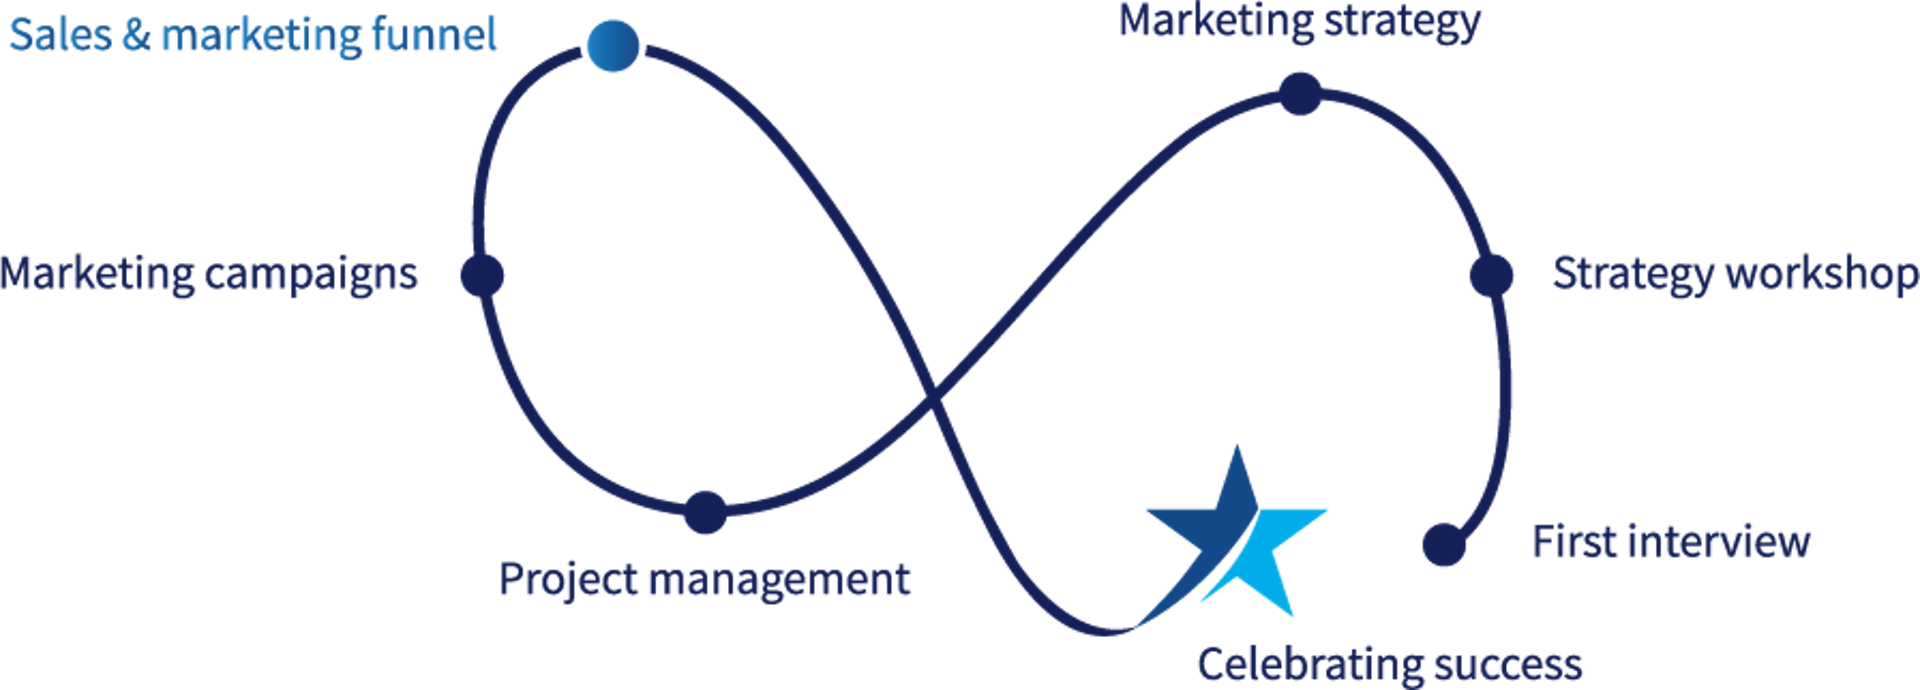 Your marketing journey to success